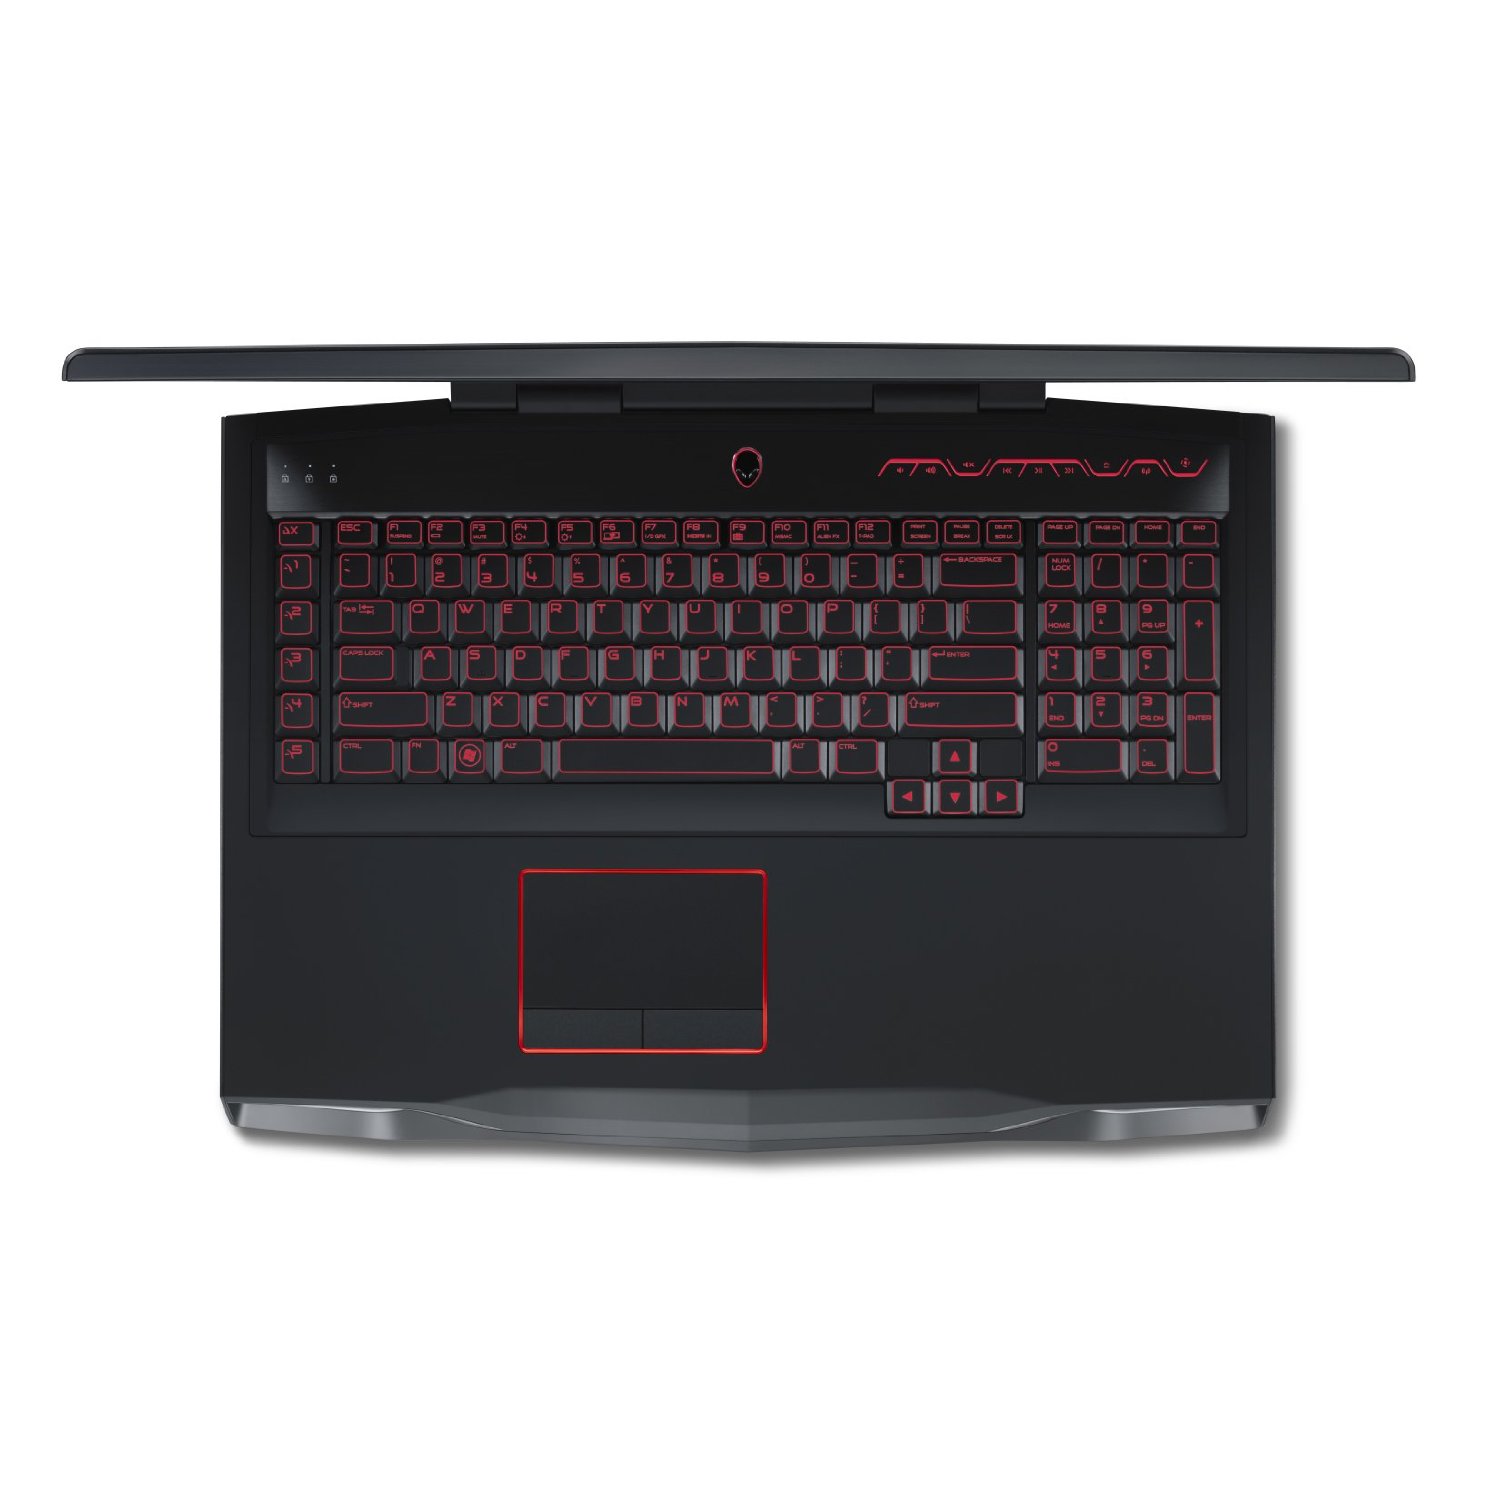 http://thetechjournal.com/wp-content/uploads/images/1206/1340513148-alienware-m17xr3-17inch-gaming-laptop-8.jpg